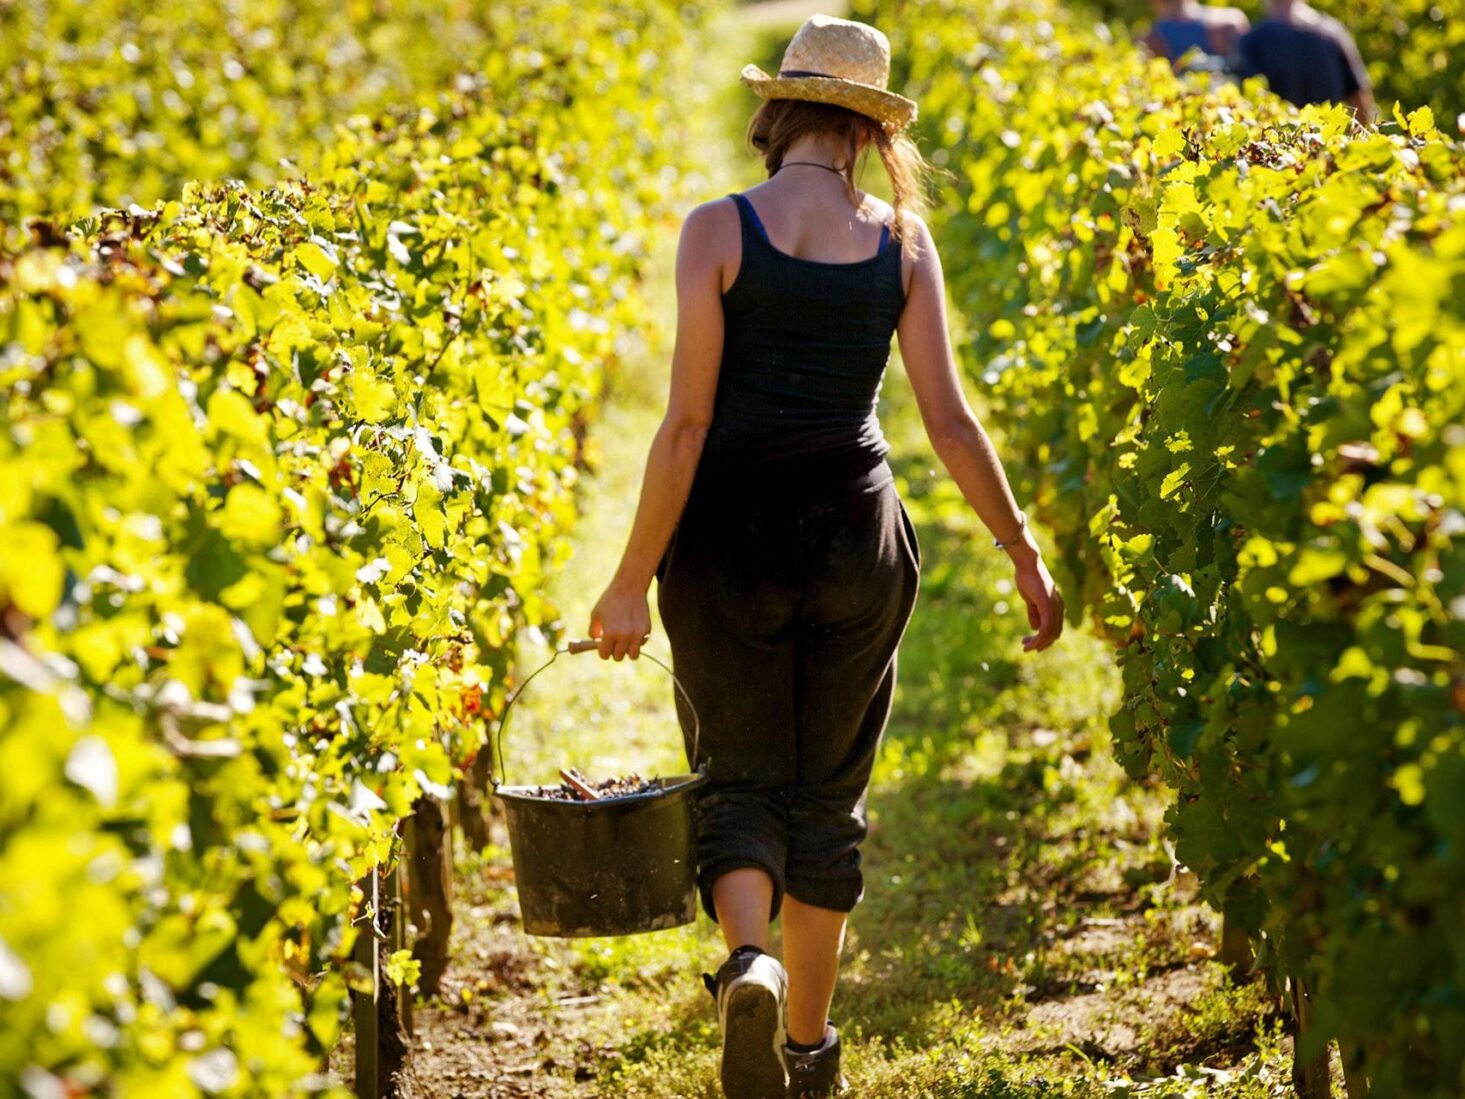 Meet the women shaking up the wine industry